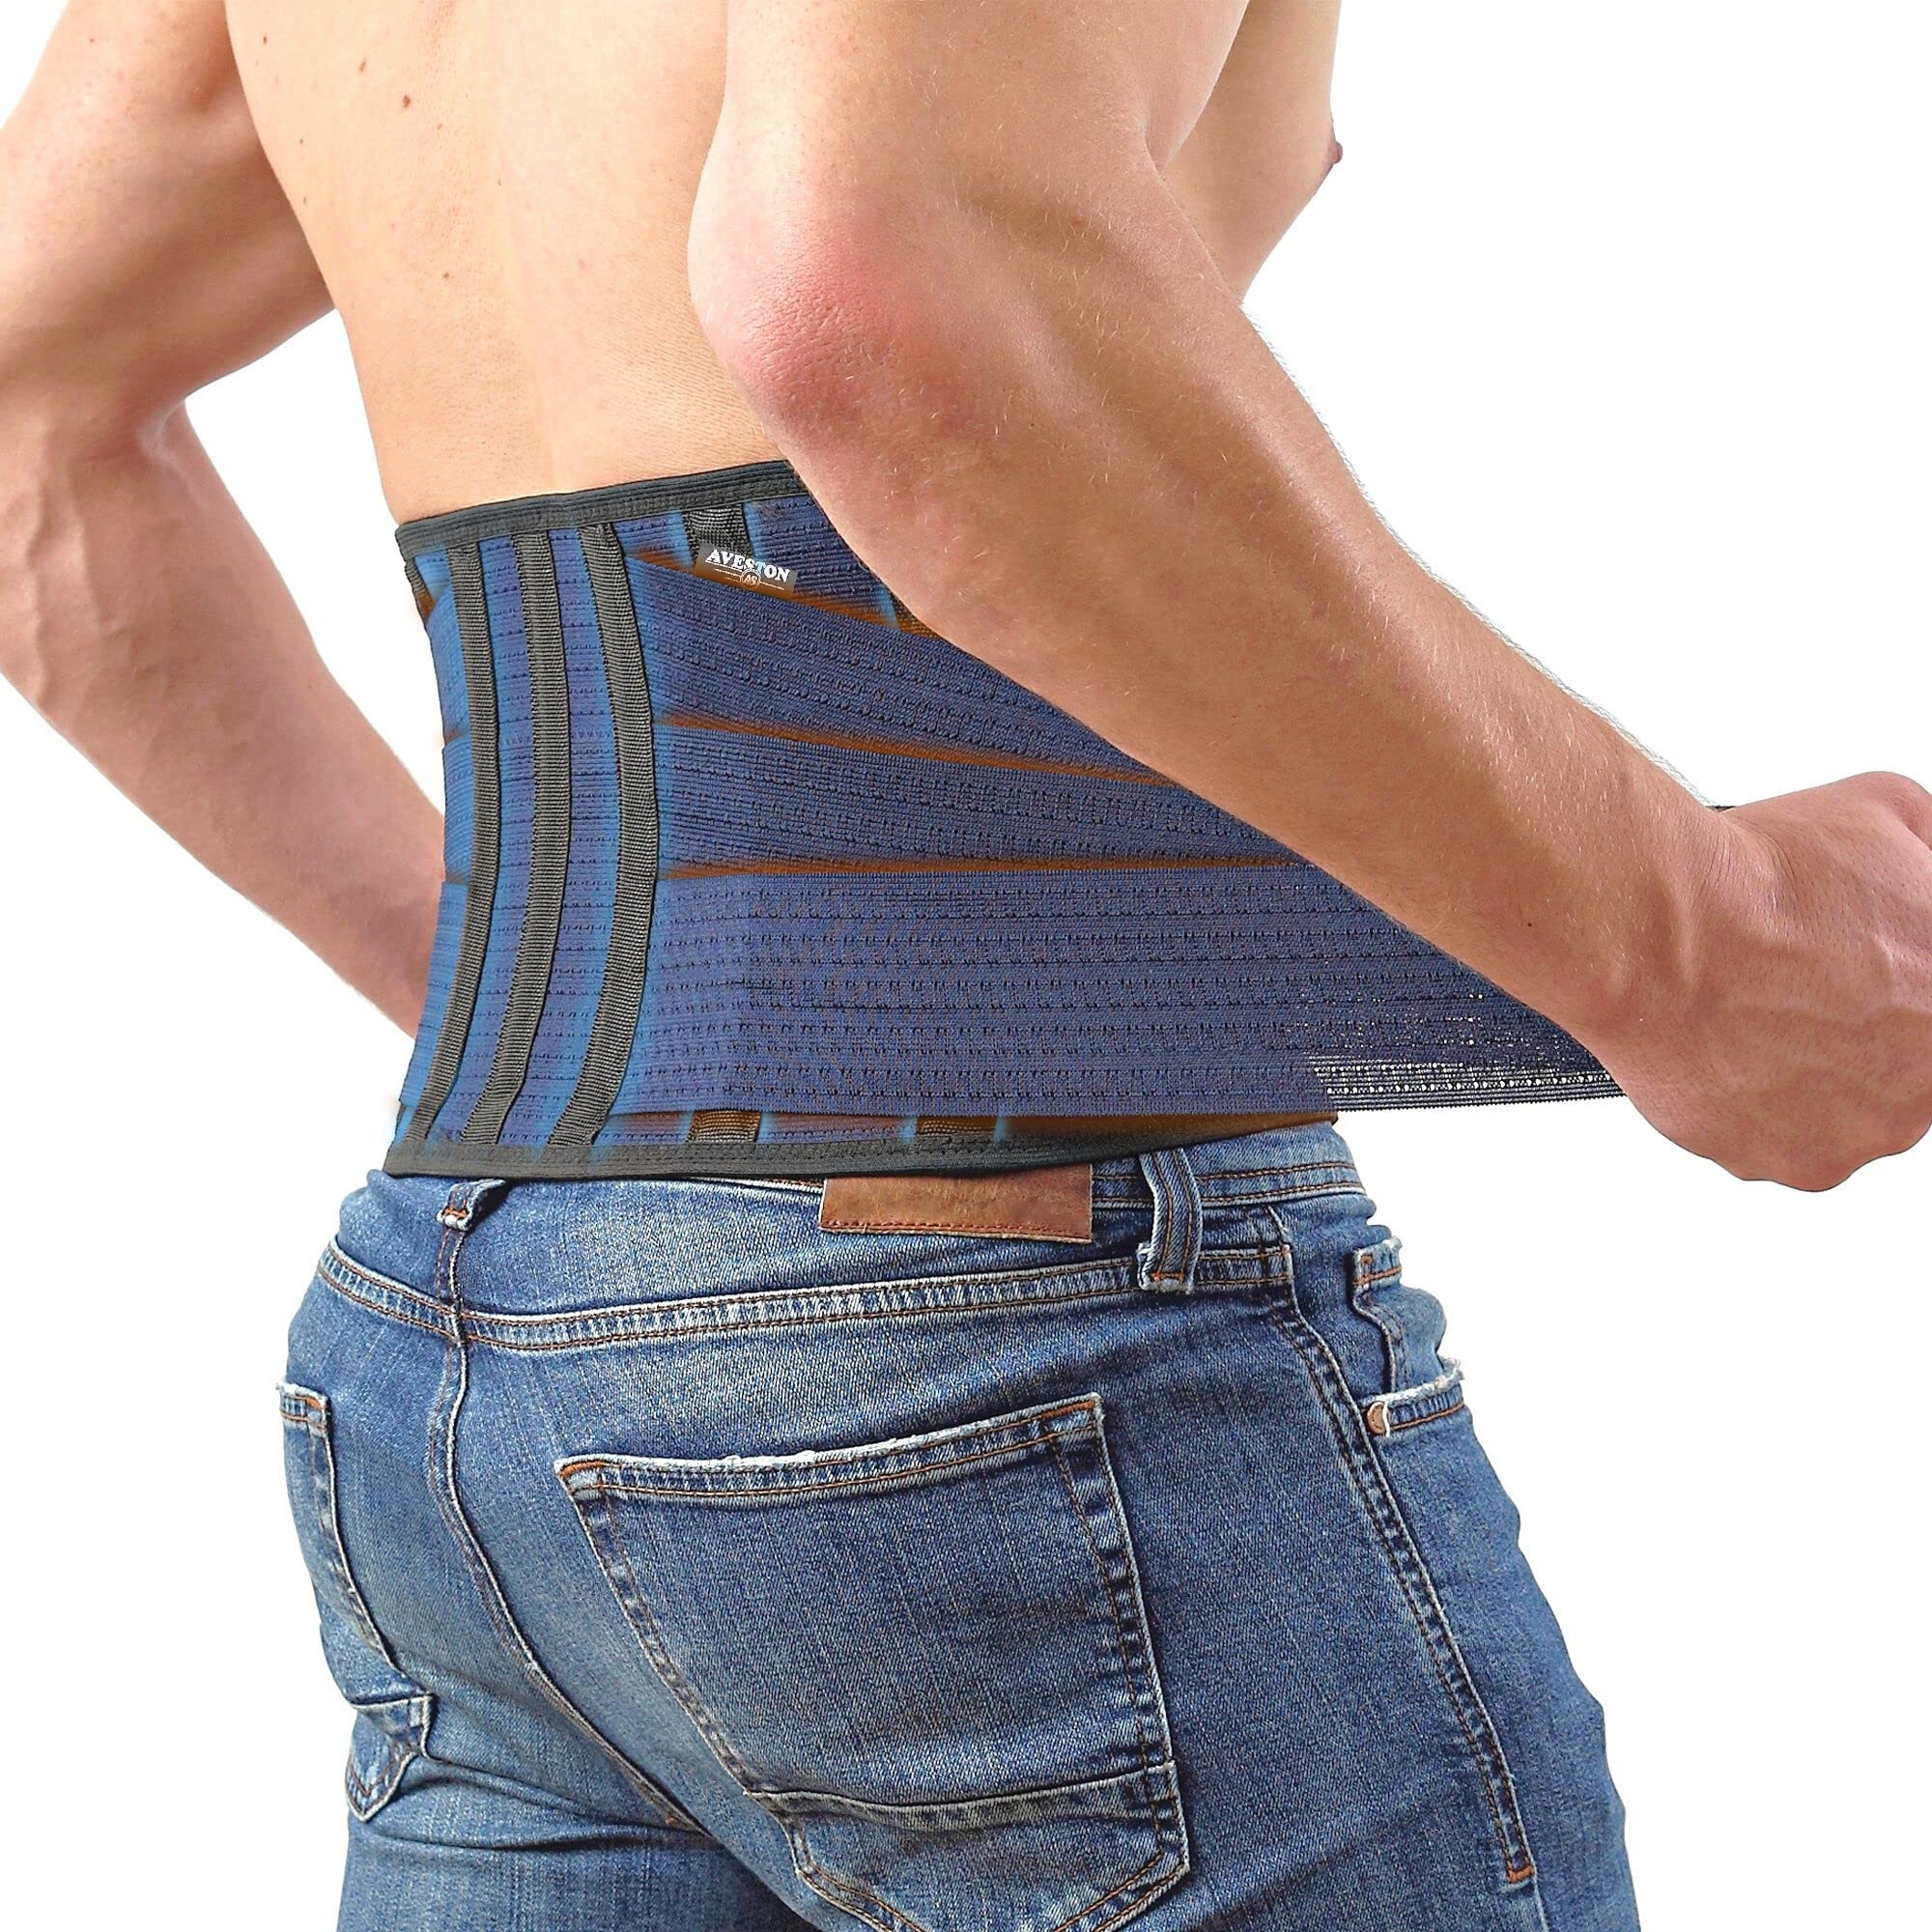 Back Support Lower Back Brace Pain Relief Lumbar Support Belt for